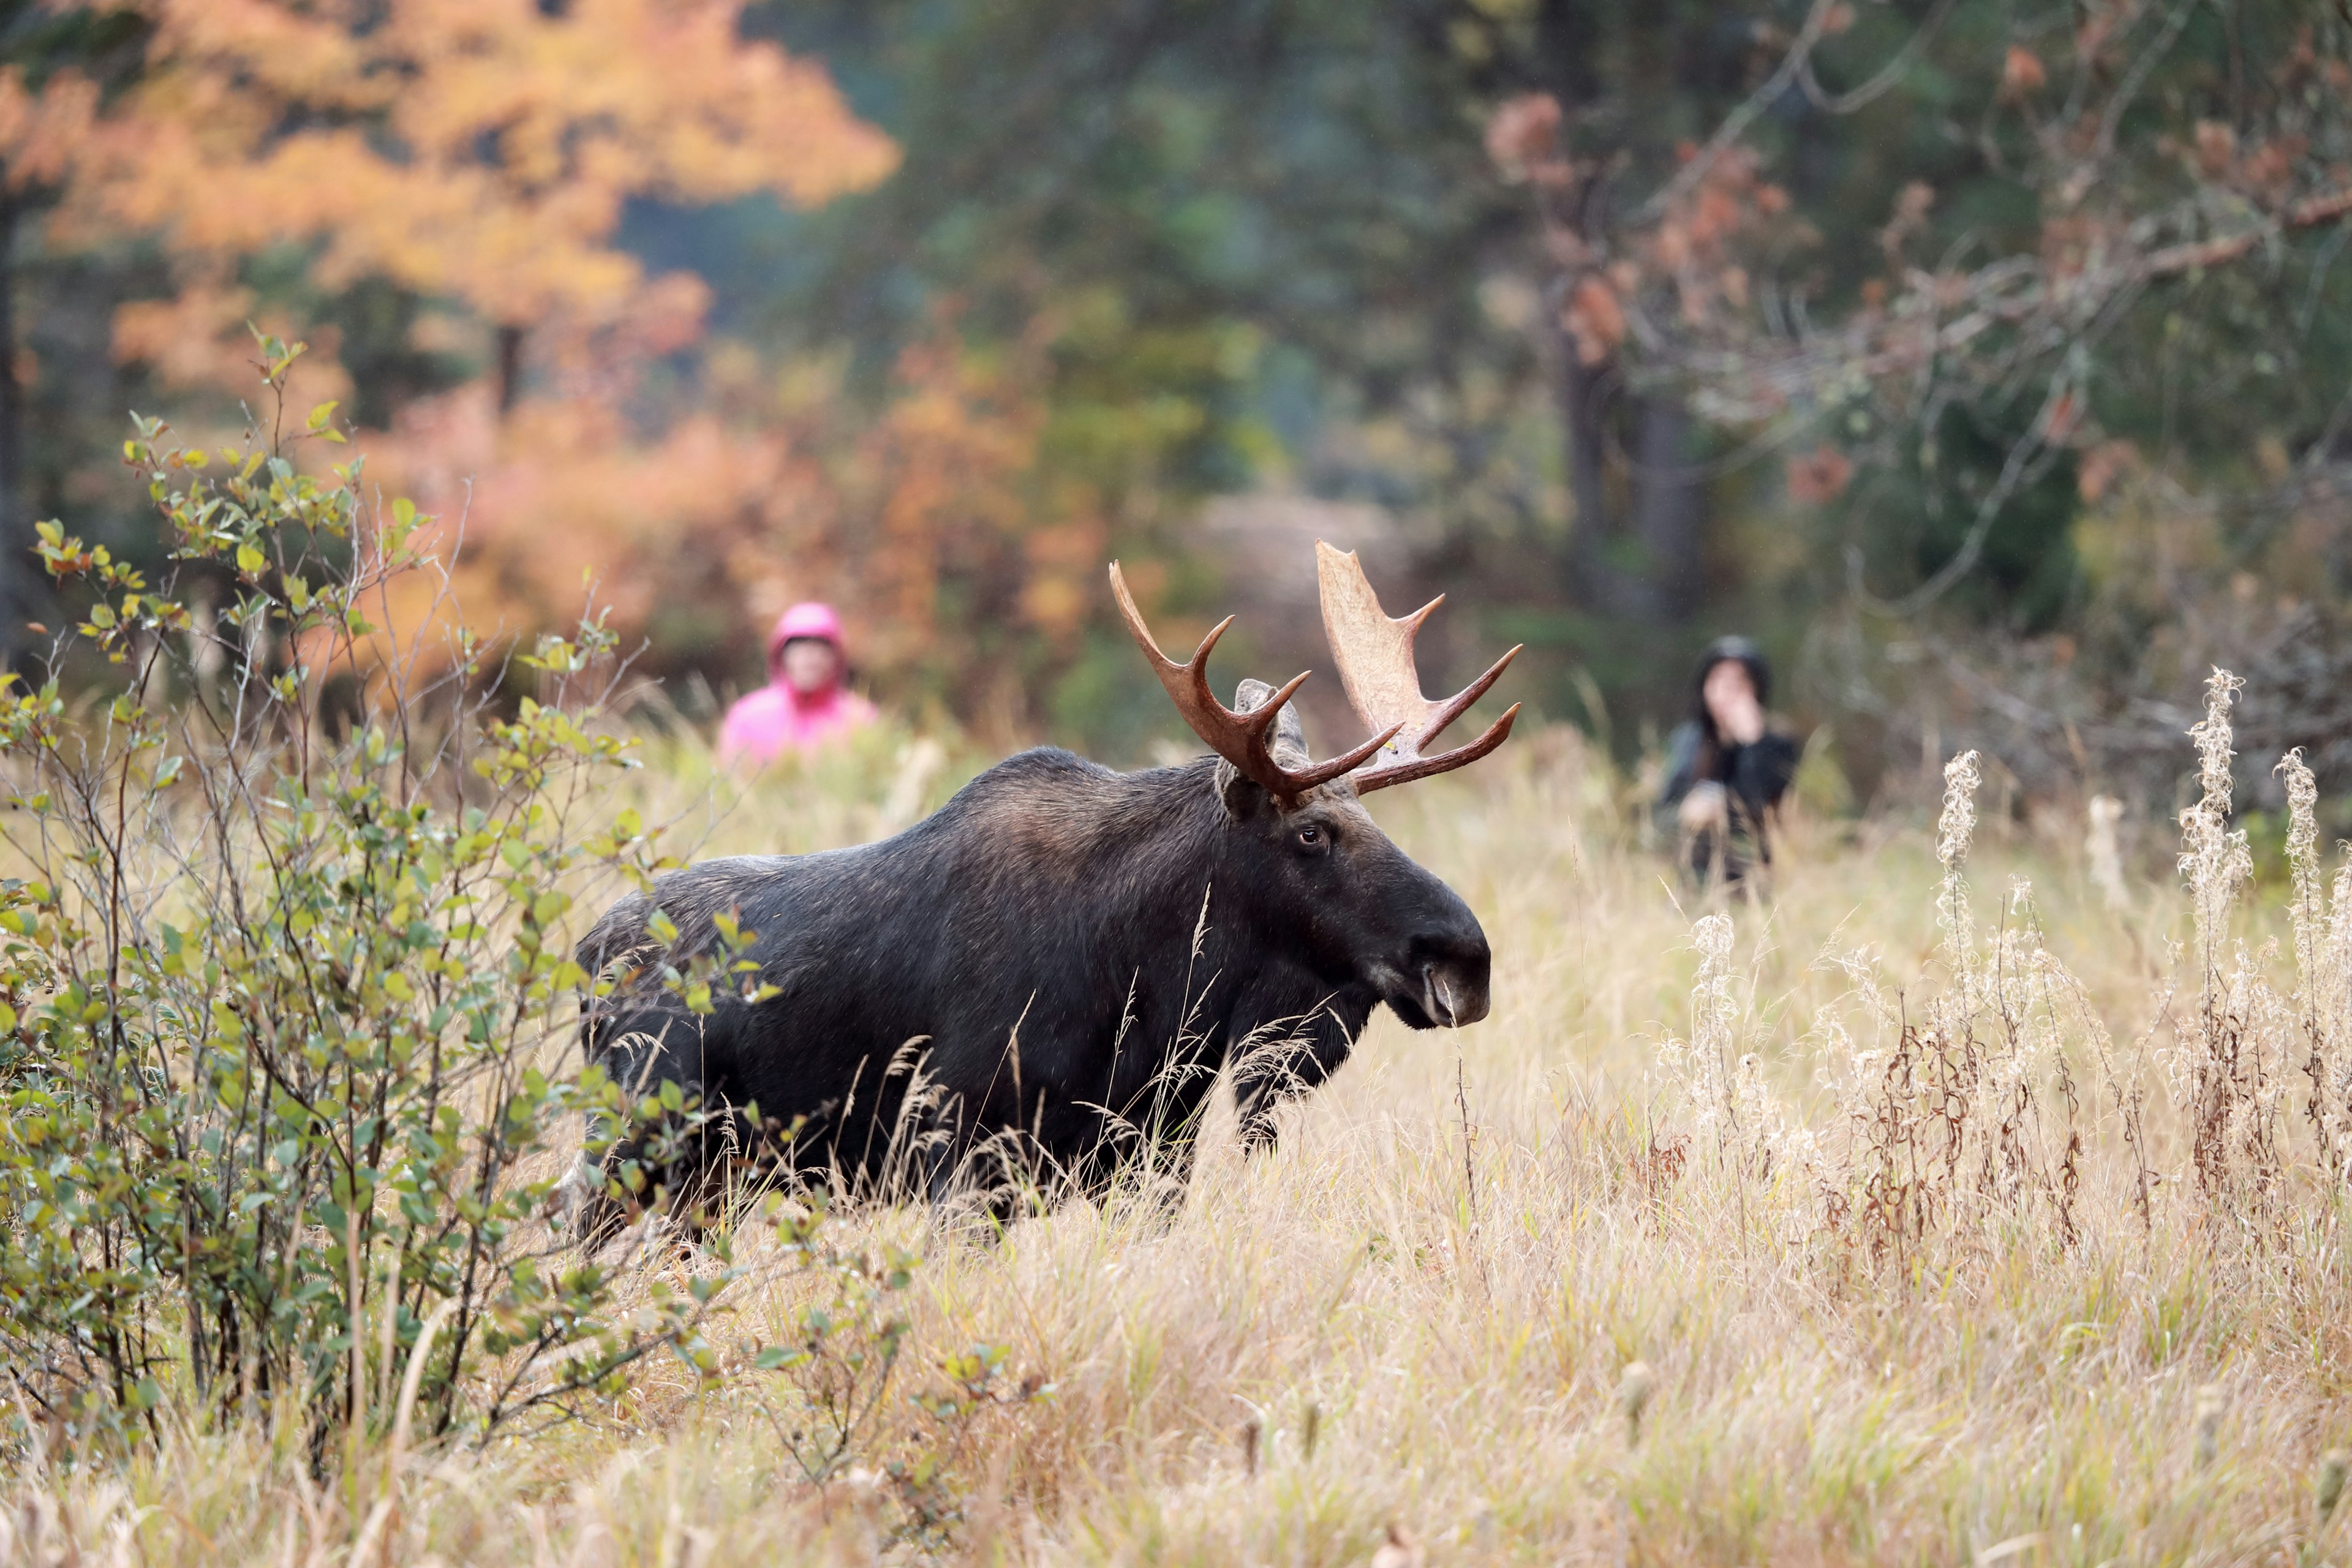 People walking along a trail stop to watch a Bull Moose during the rut in Algonquin Provincial Park in Ontario, Canada